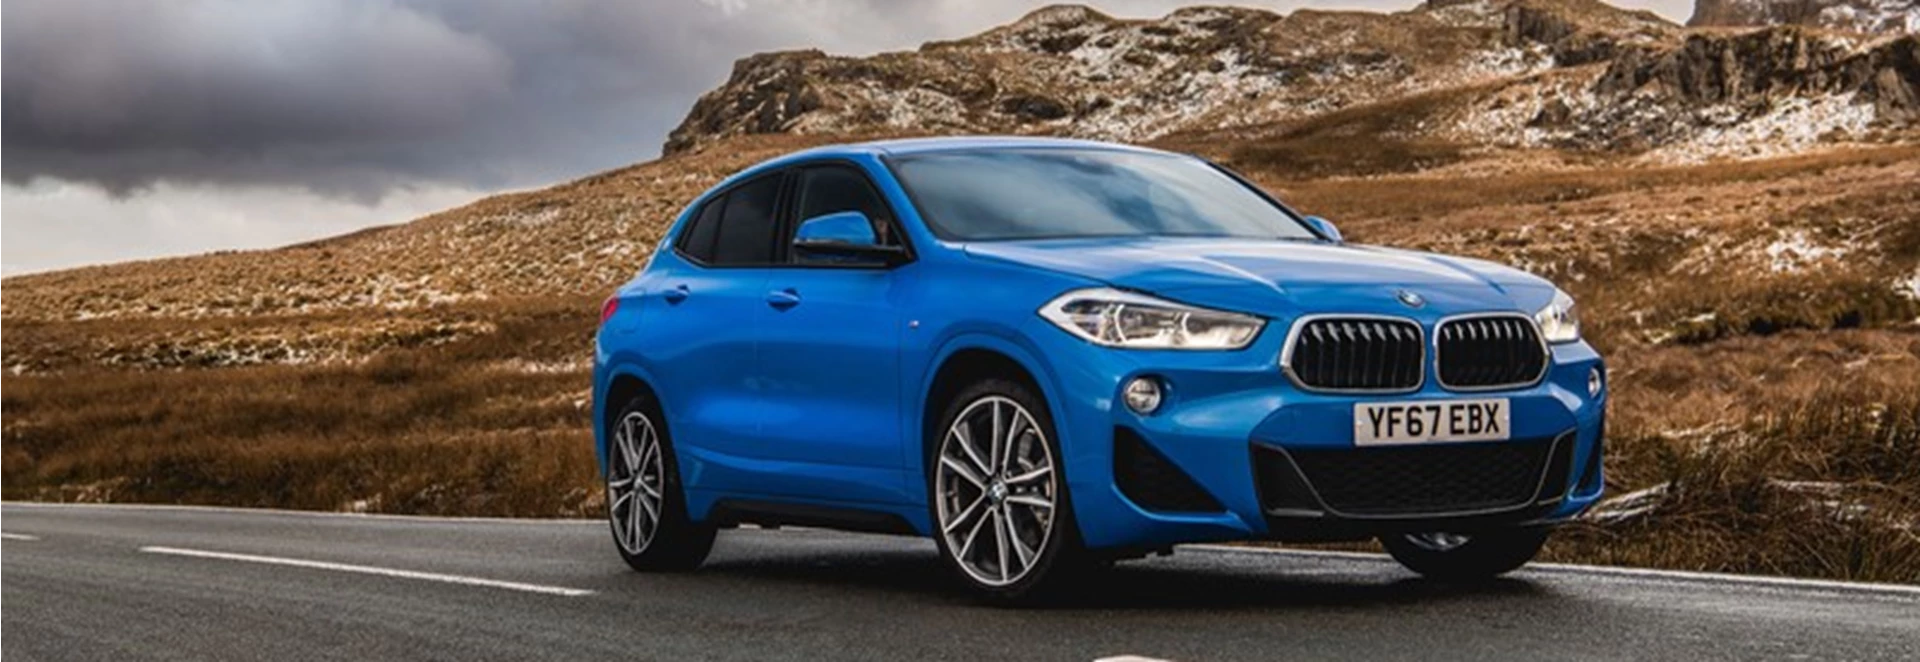 2018 BMW X2 review